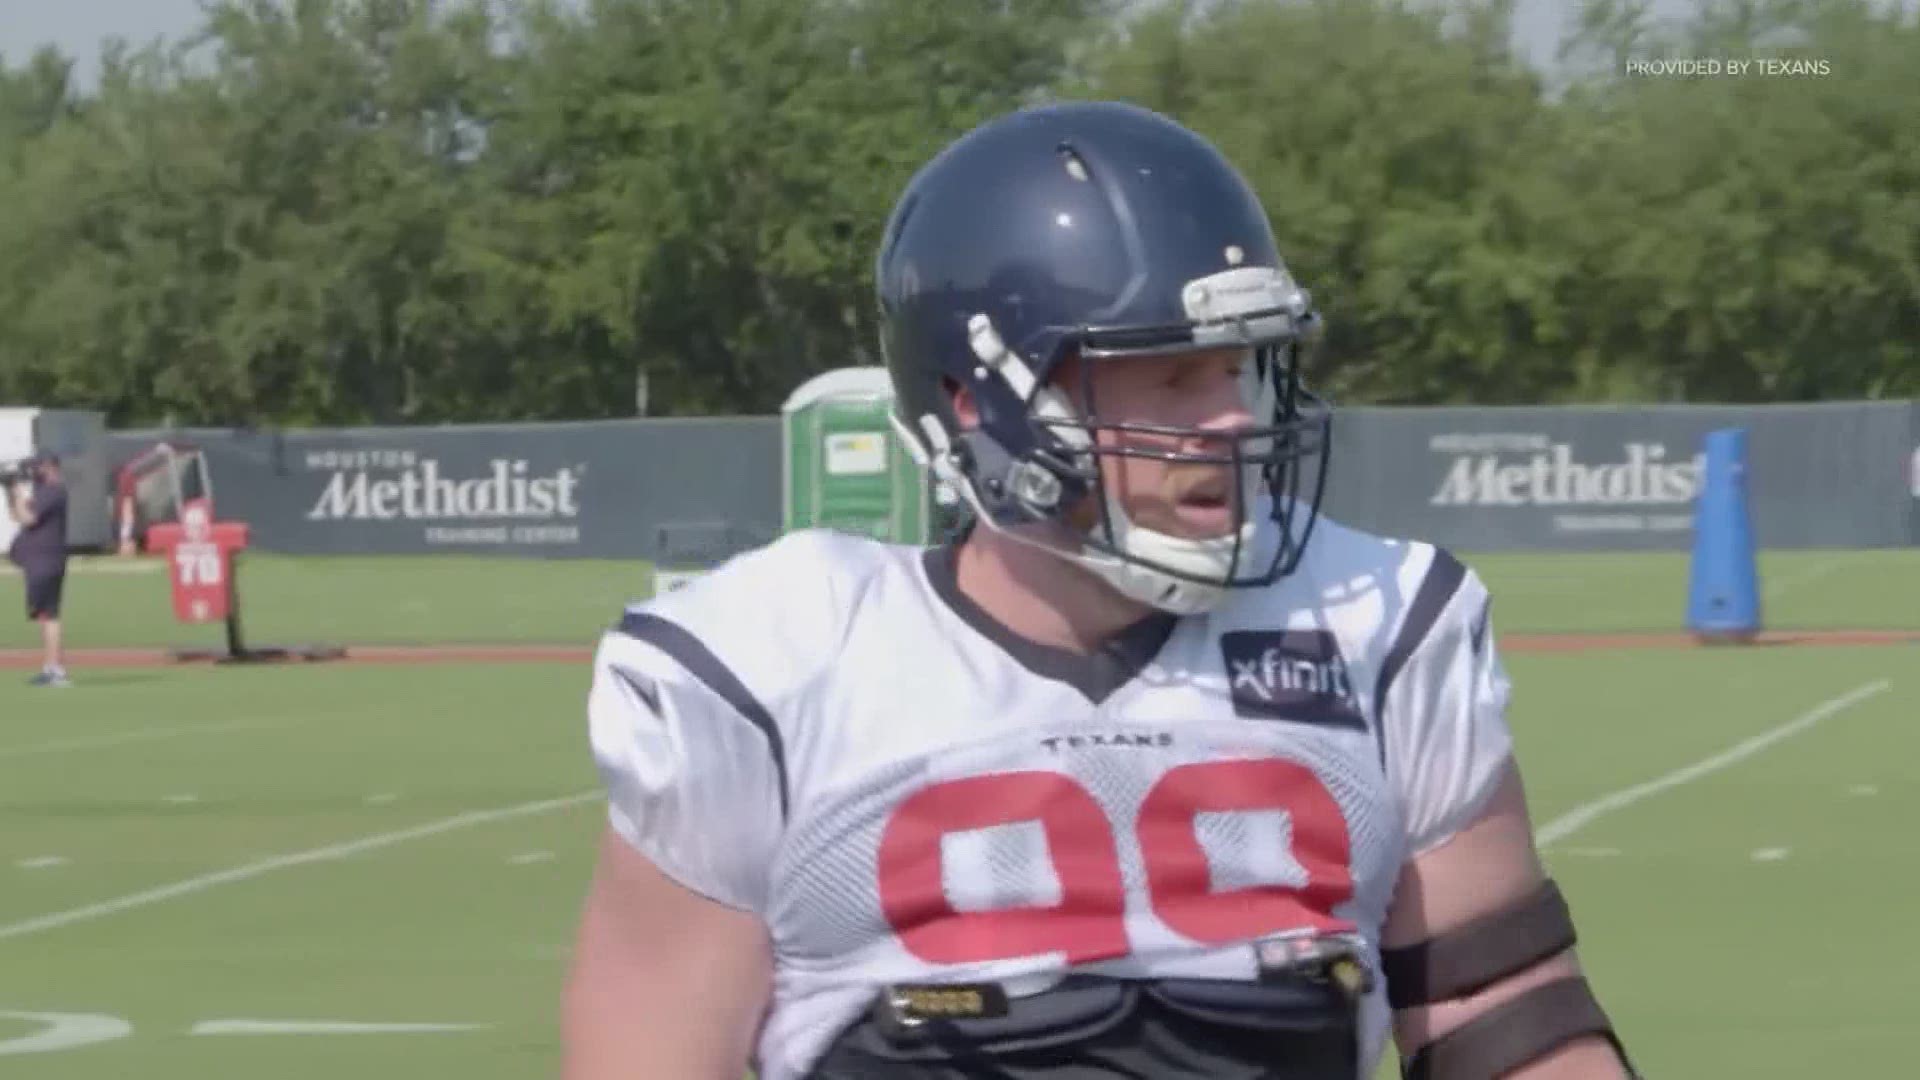 J.J. Watt has officially asked to be released from the Houston Texans and the front office mutually agreed.